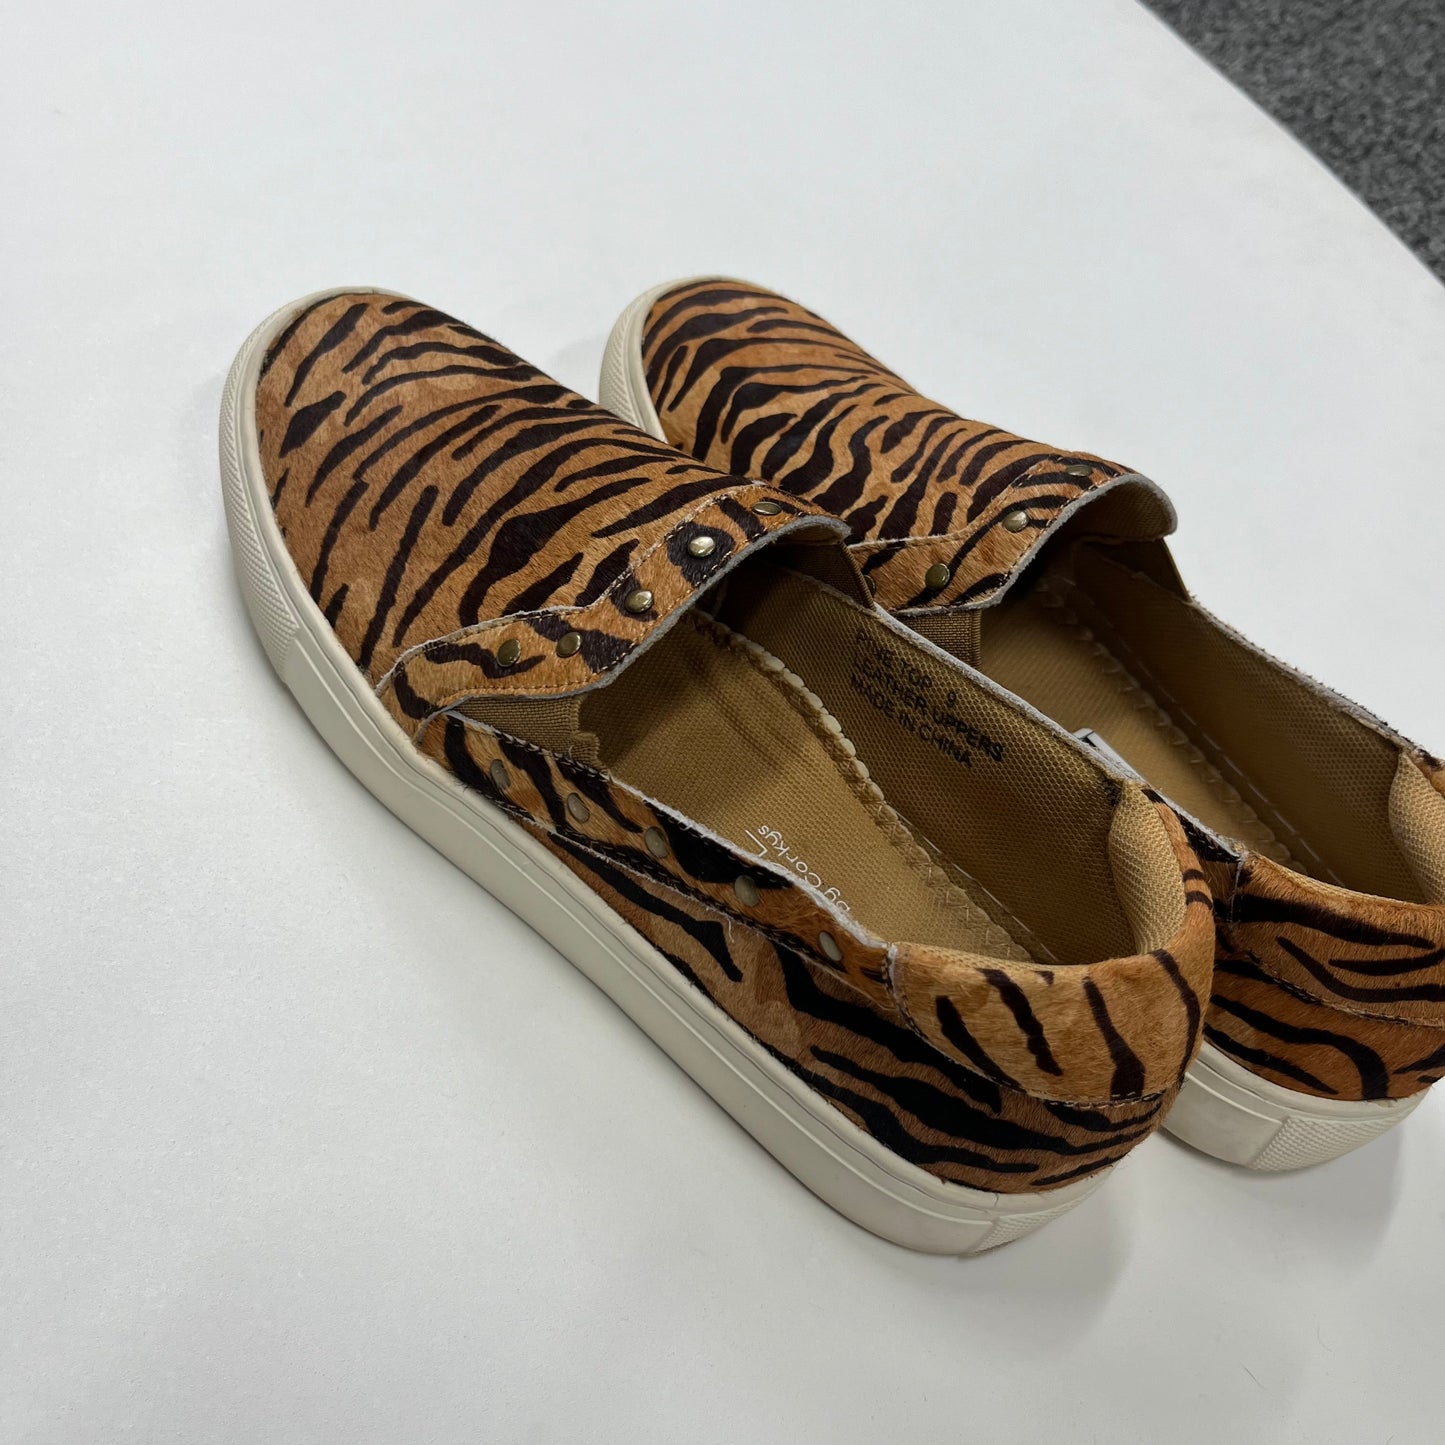 Animal Print Shoes Flats Loafer Oxford Corkys, Size 9